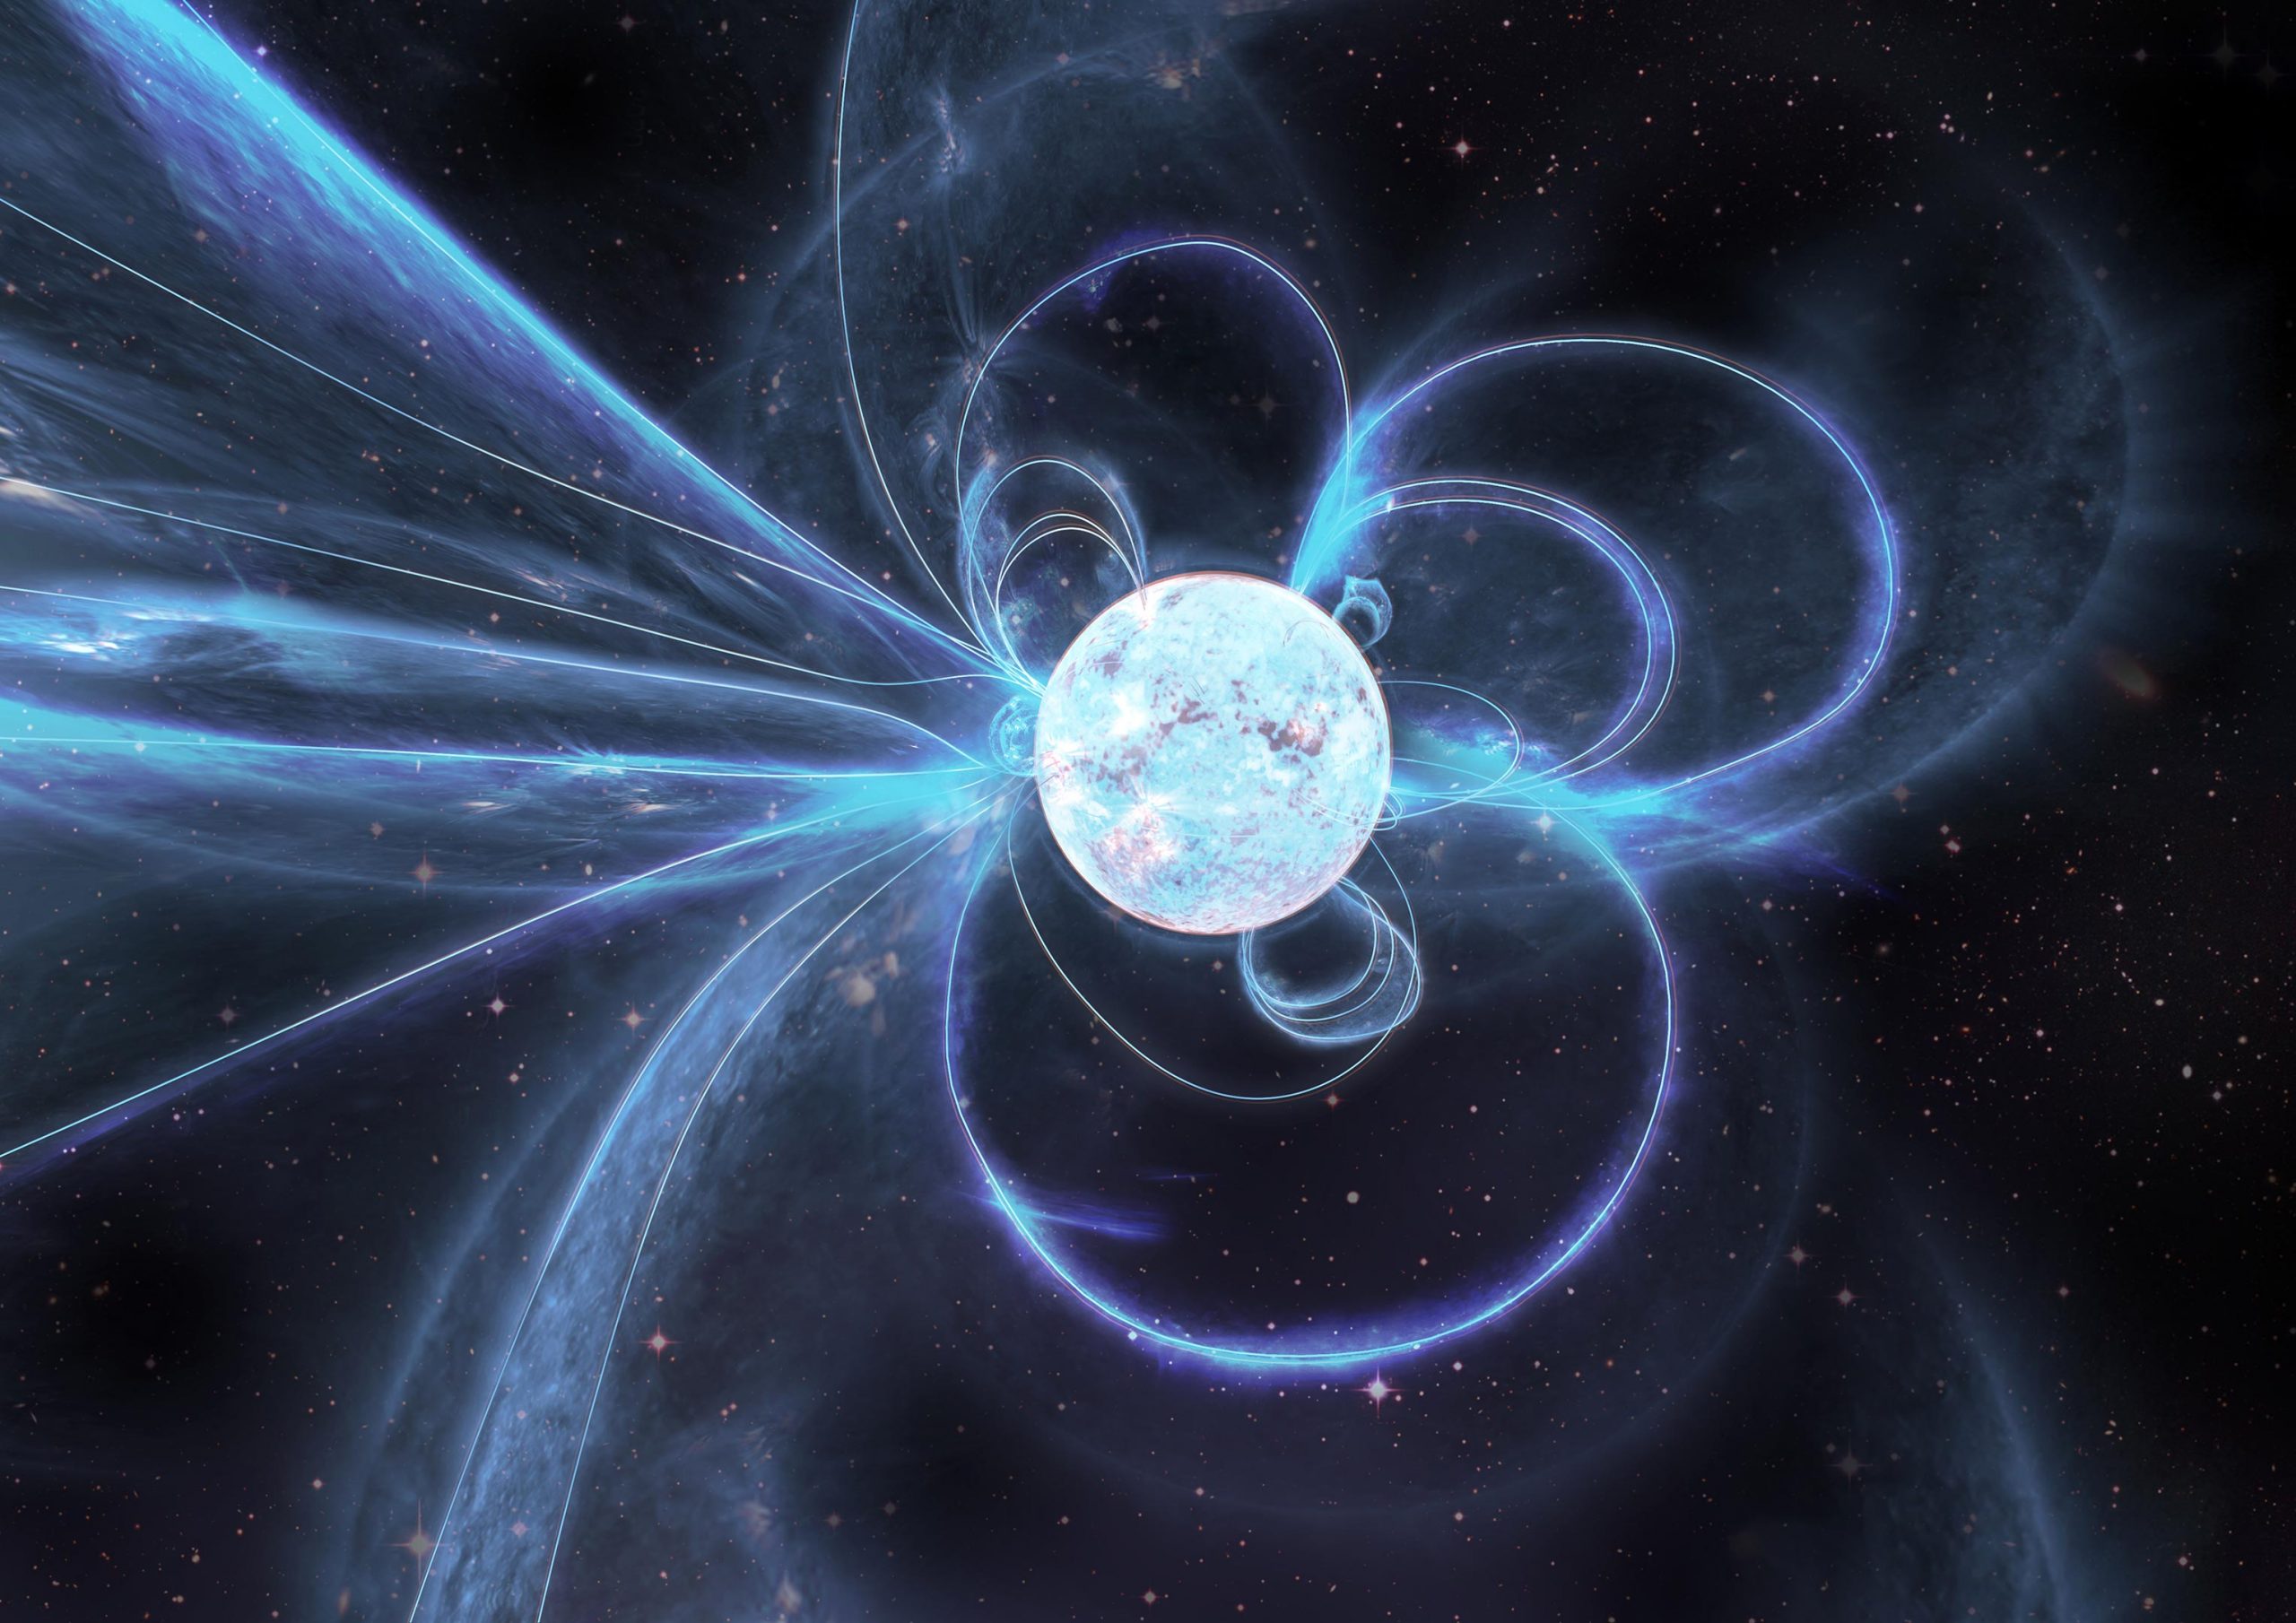 Bizarre activity never seen before, seen from one of the strongest magnets in the universe